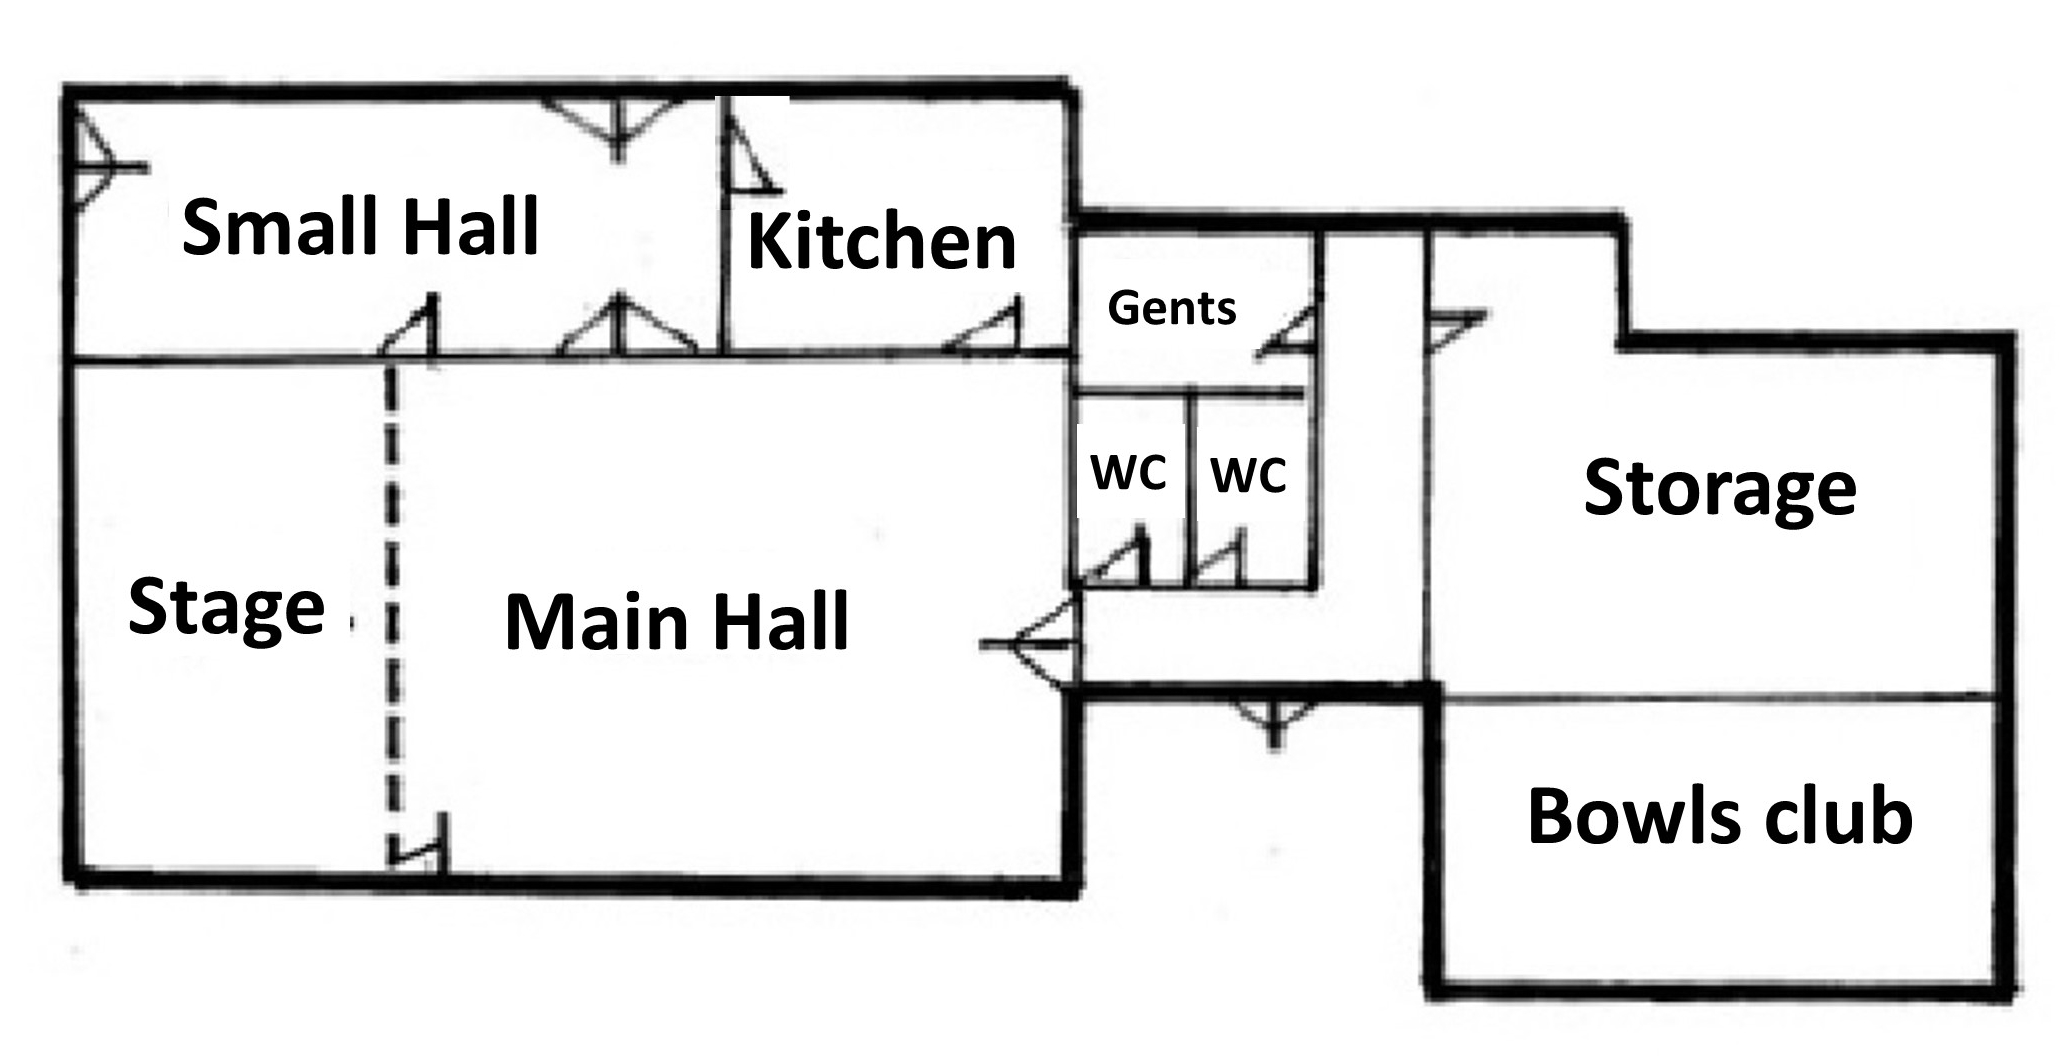 Floor plan of Potter Heigham Village hall showing the following areas: Hall, stage, small hall, kitchen, toilets, small meeting room and bowls club.